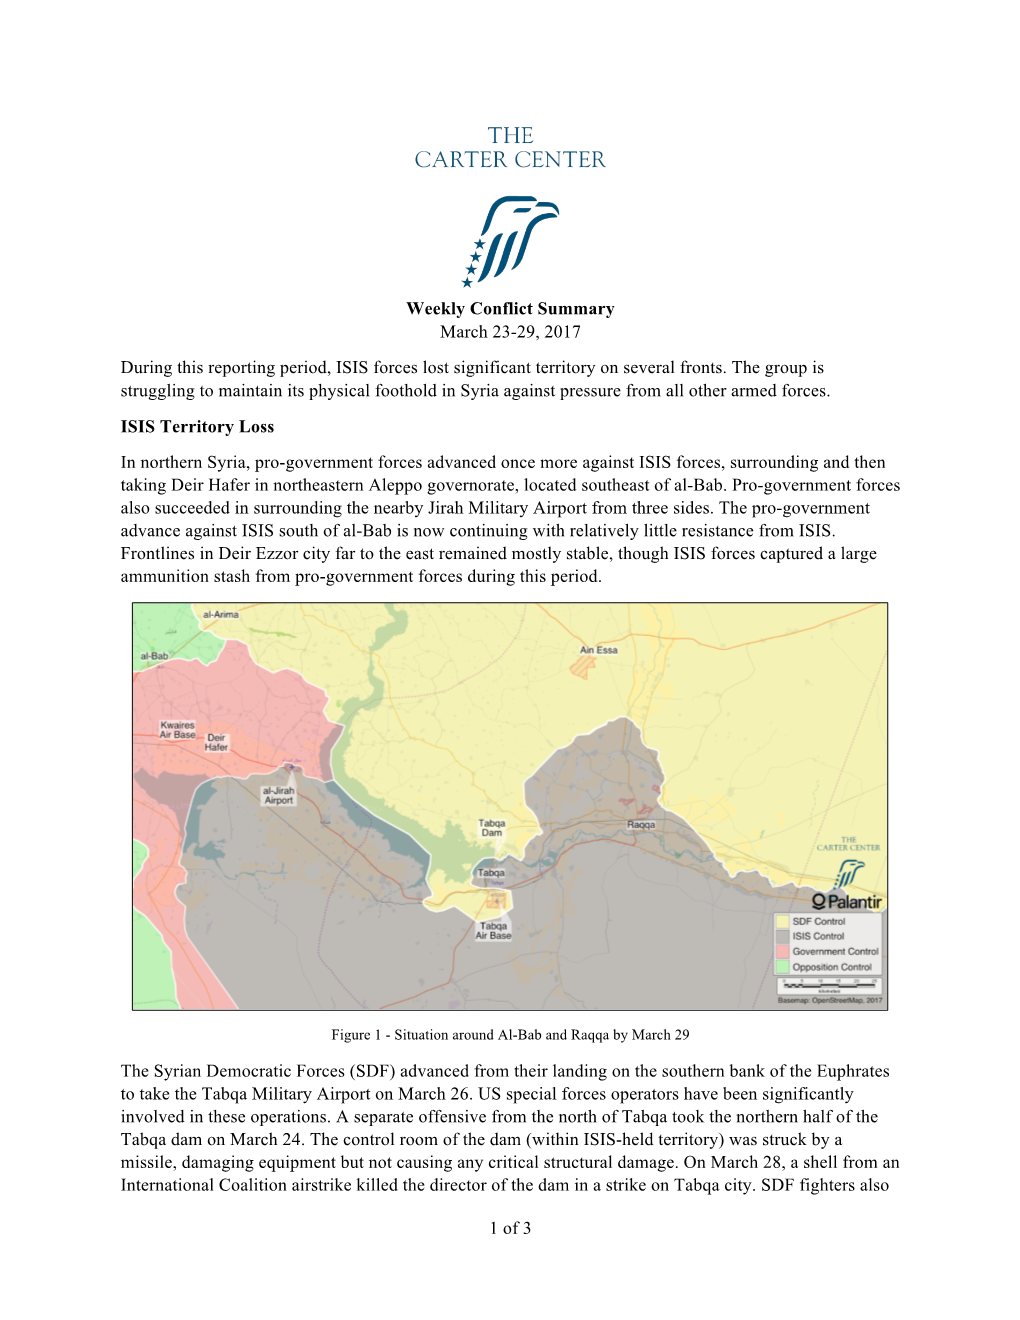 1 of 3 Weekly Conflict Summary March 23-29, 2017 During This Reporting Period, ISIS Forces Lost Significant Territory on Several